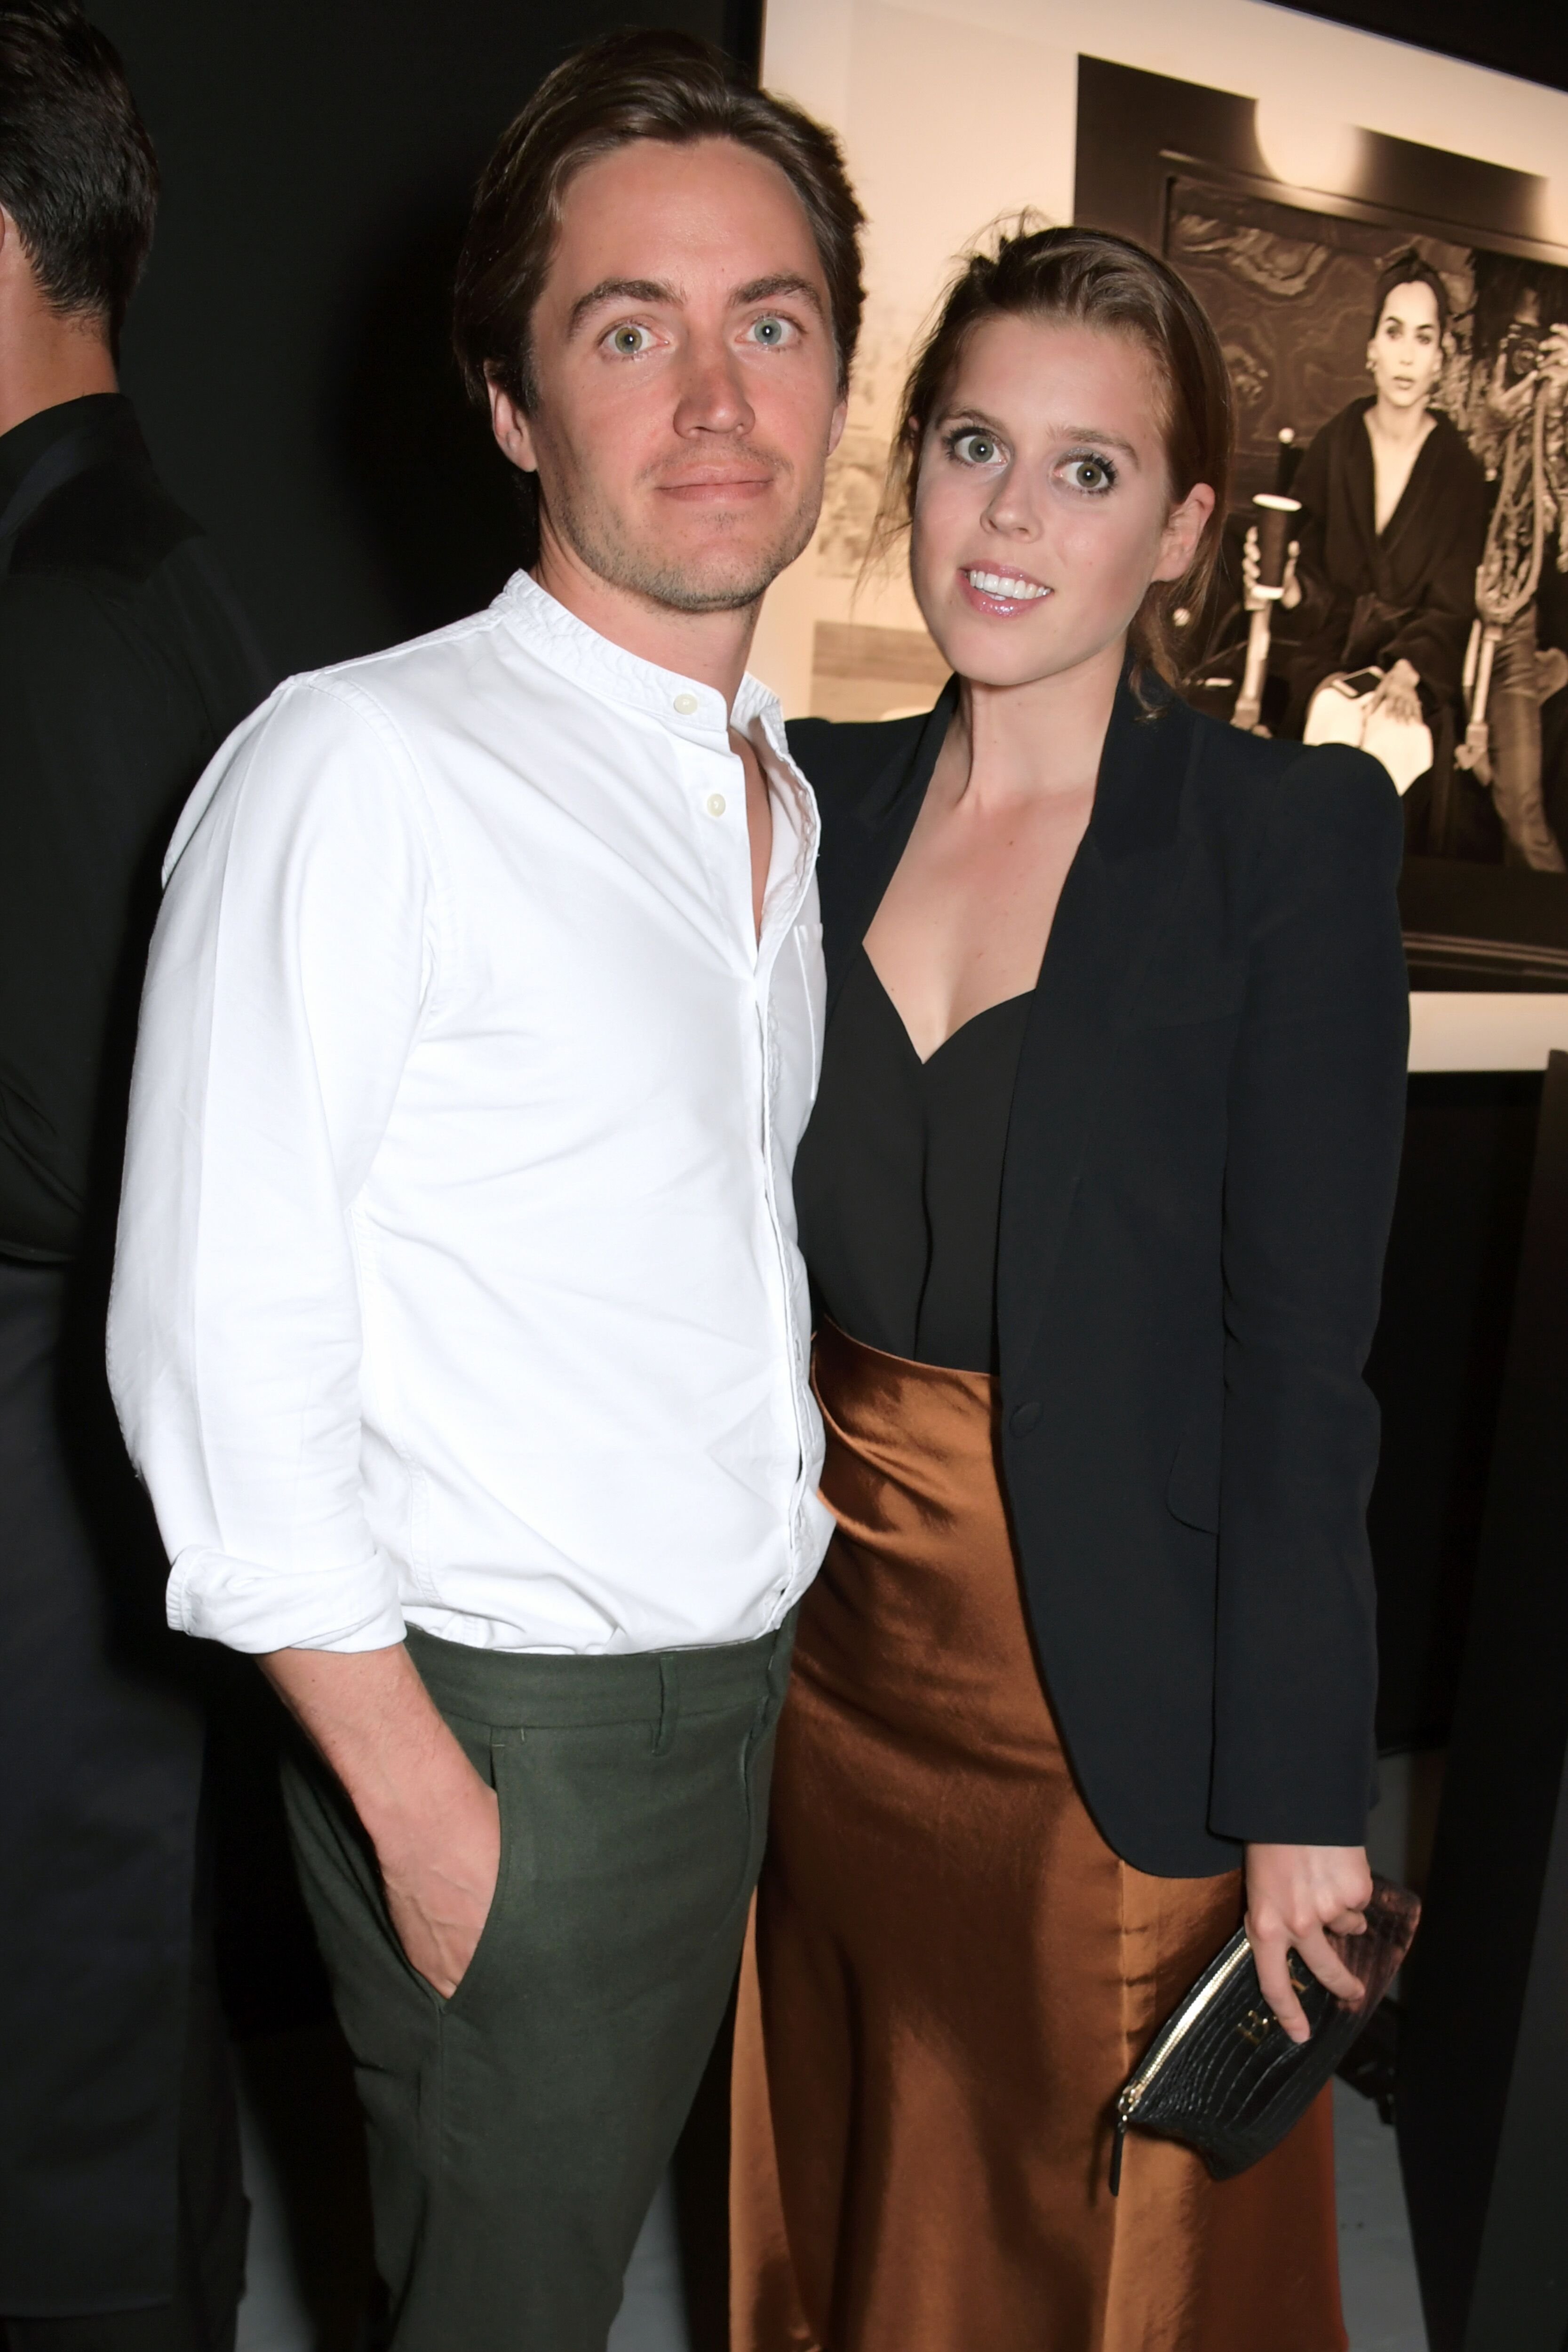 Edoardo Mapelli Mozzi and Princess Beatrice of York at the Lenny Kravitz & Dom Perignon 'Assemblage' exhibition on July 10, 2019, in London, England | Photo: Getty Images